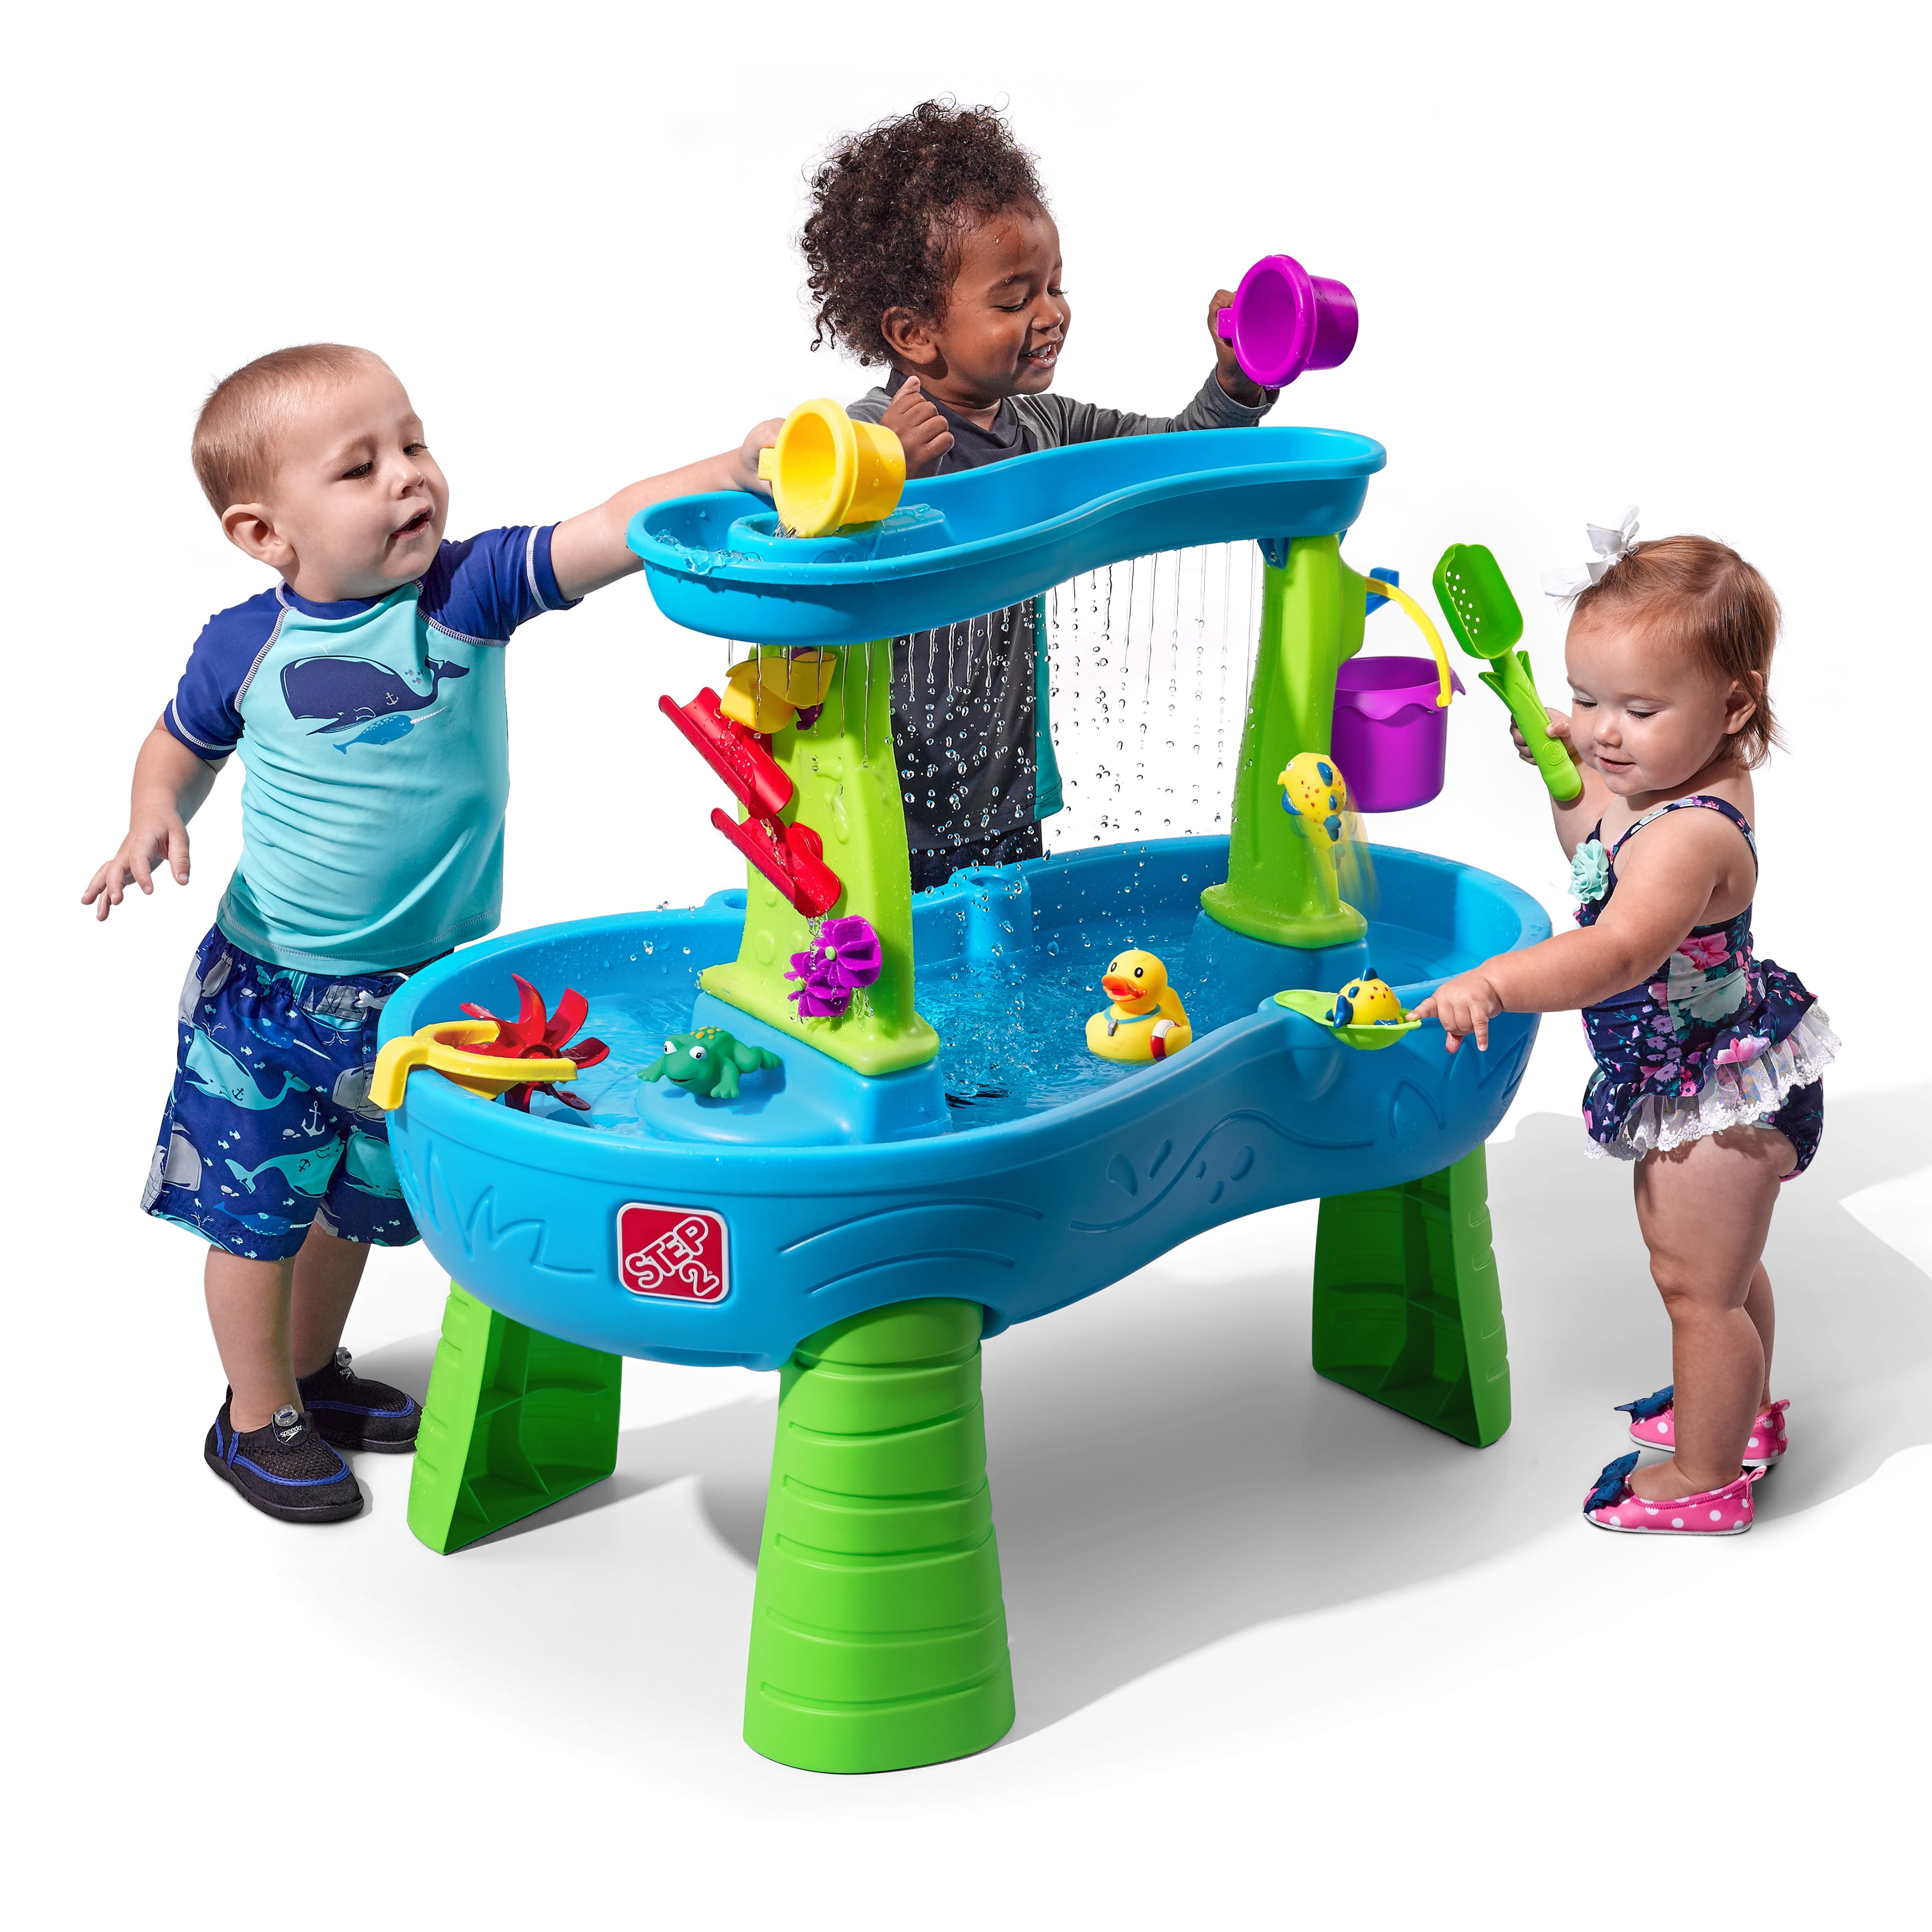 Children Toy Large Sand And Water Table Set Tools Kit Dolls Game Gift 